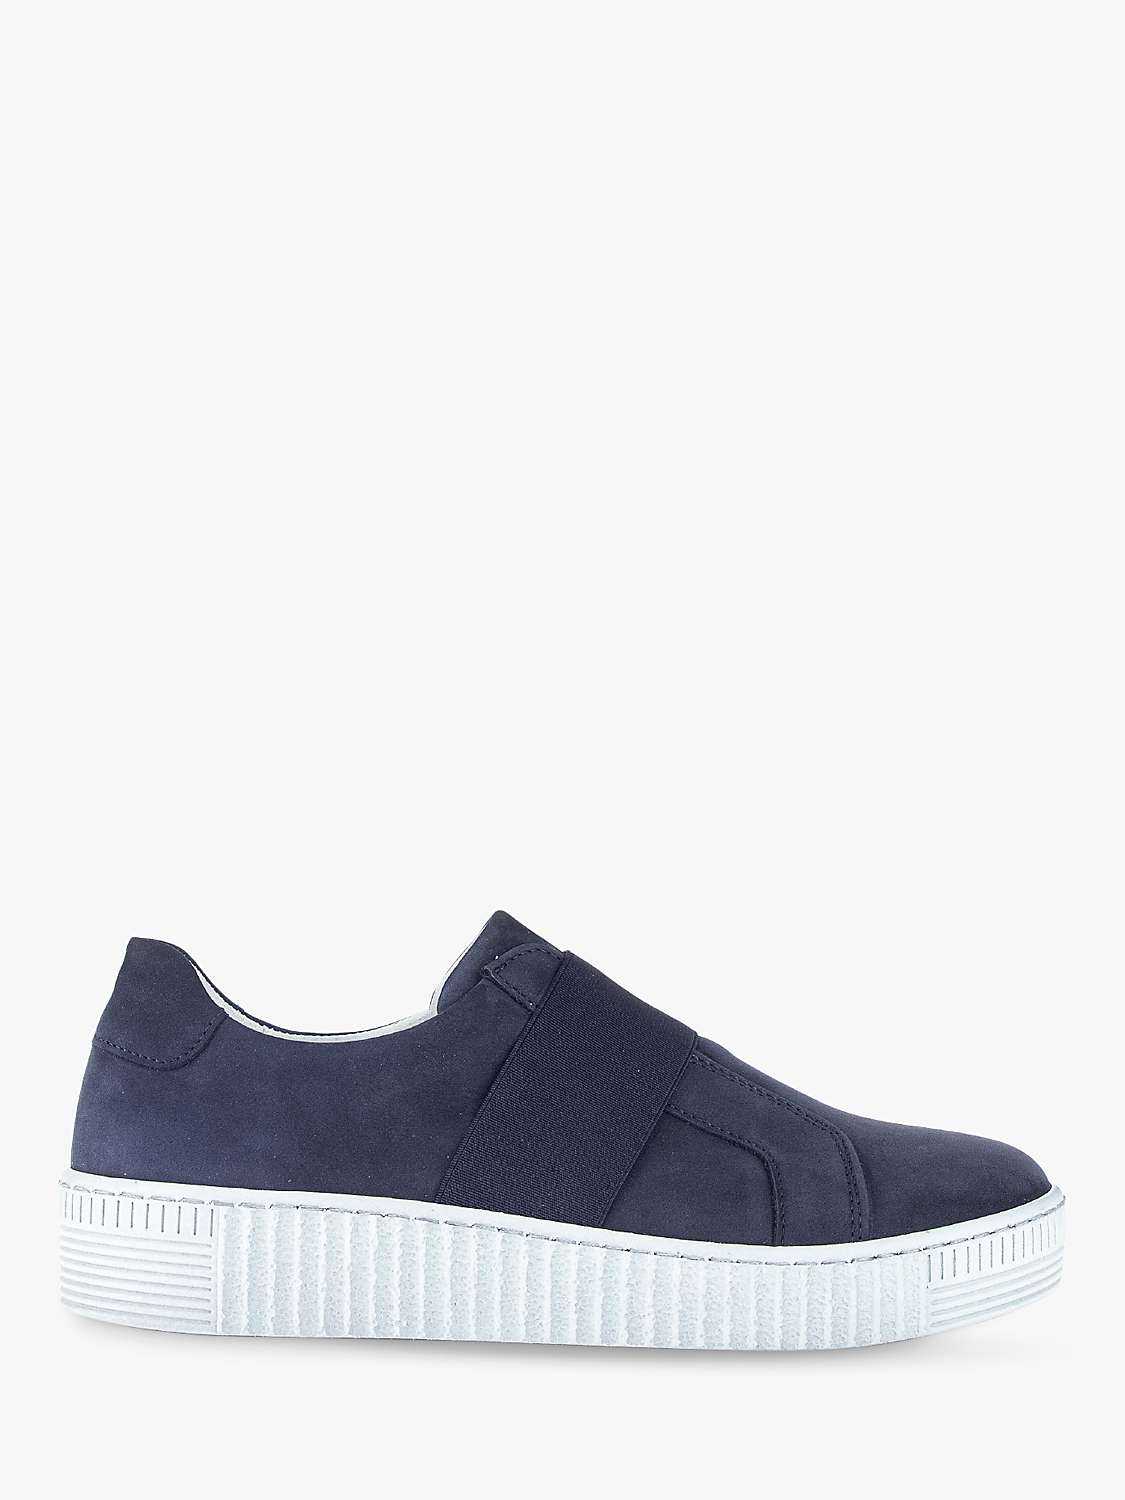 Buy Gabor Willow Fashion Trainers, Blue Online at johnlewis.com